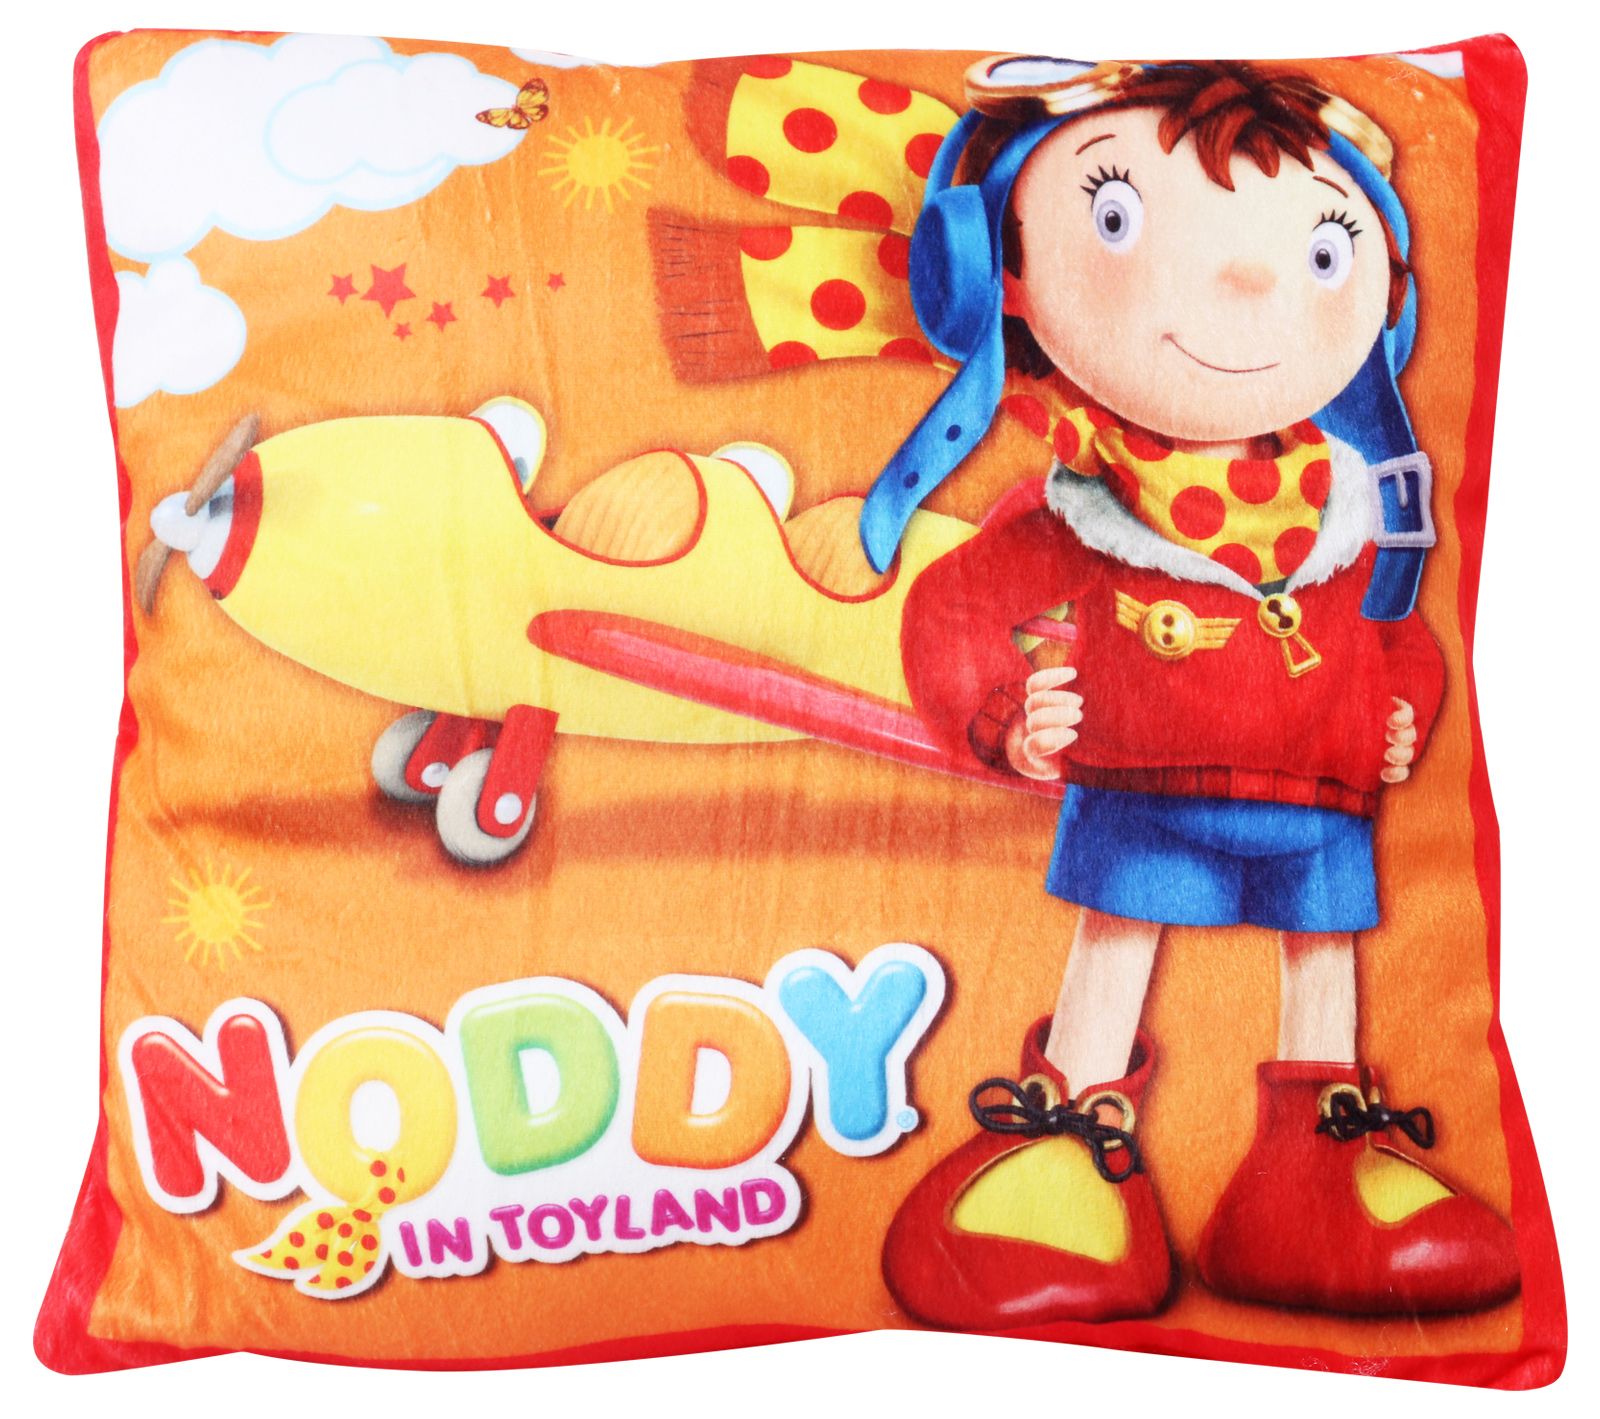 Noddy Square Shaped Pillow